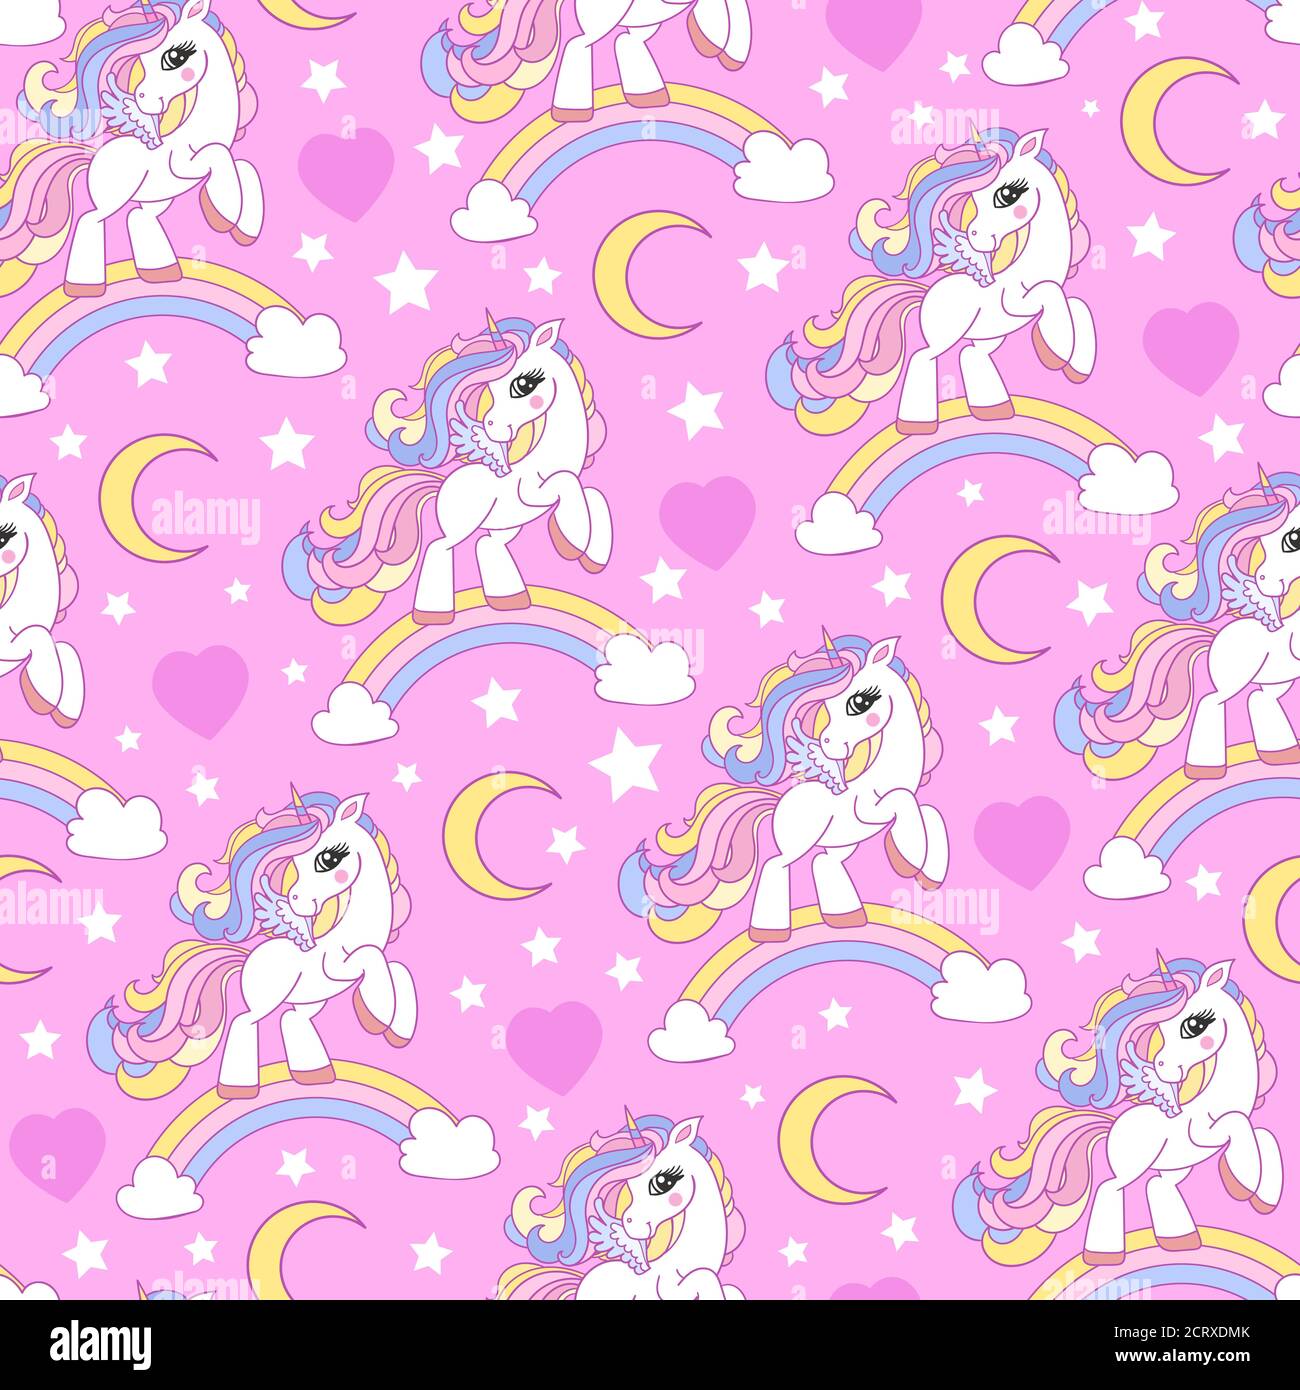 Seamless pattern with unicorn and rainbow on a pink background ...